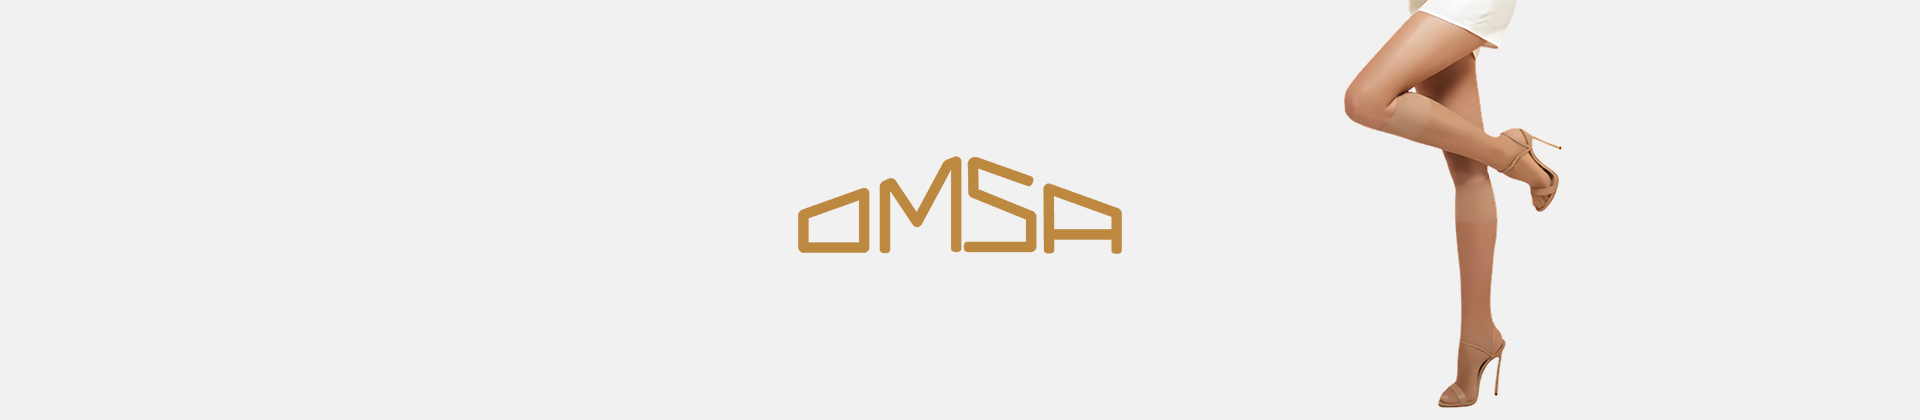 Omsa women socks, tights and knee-highs online